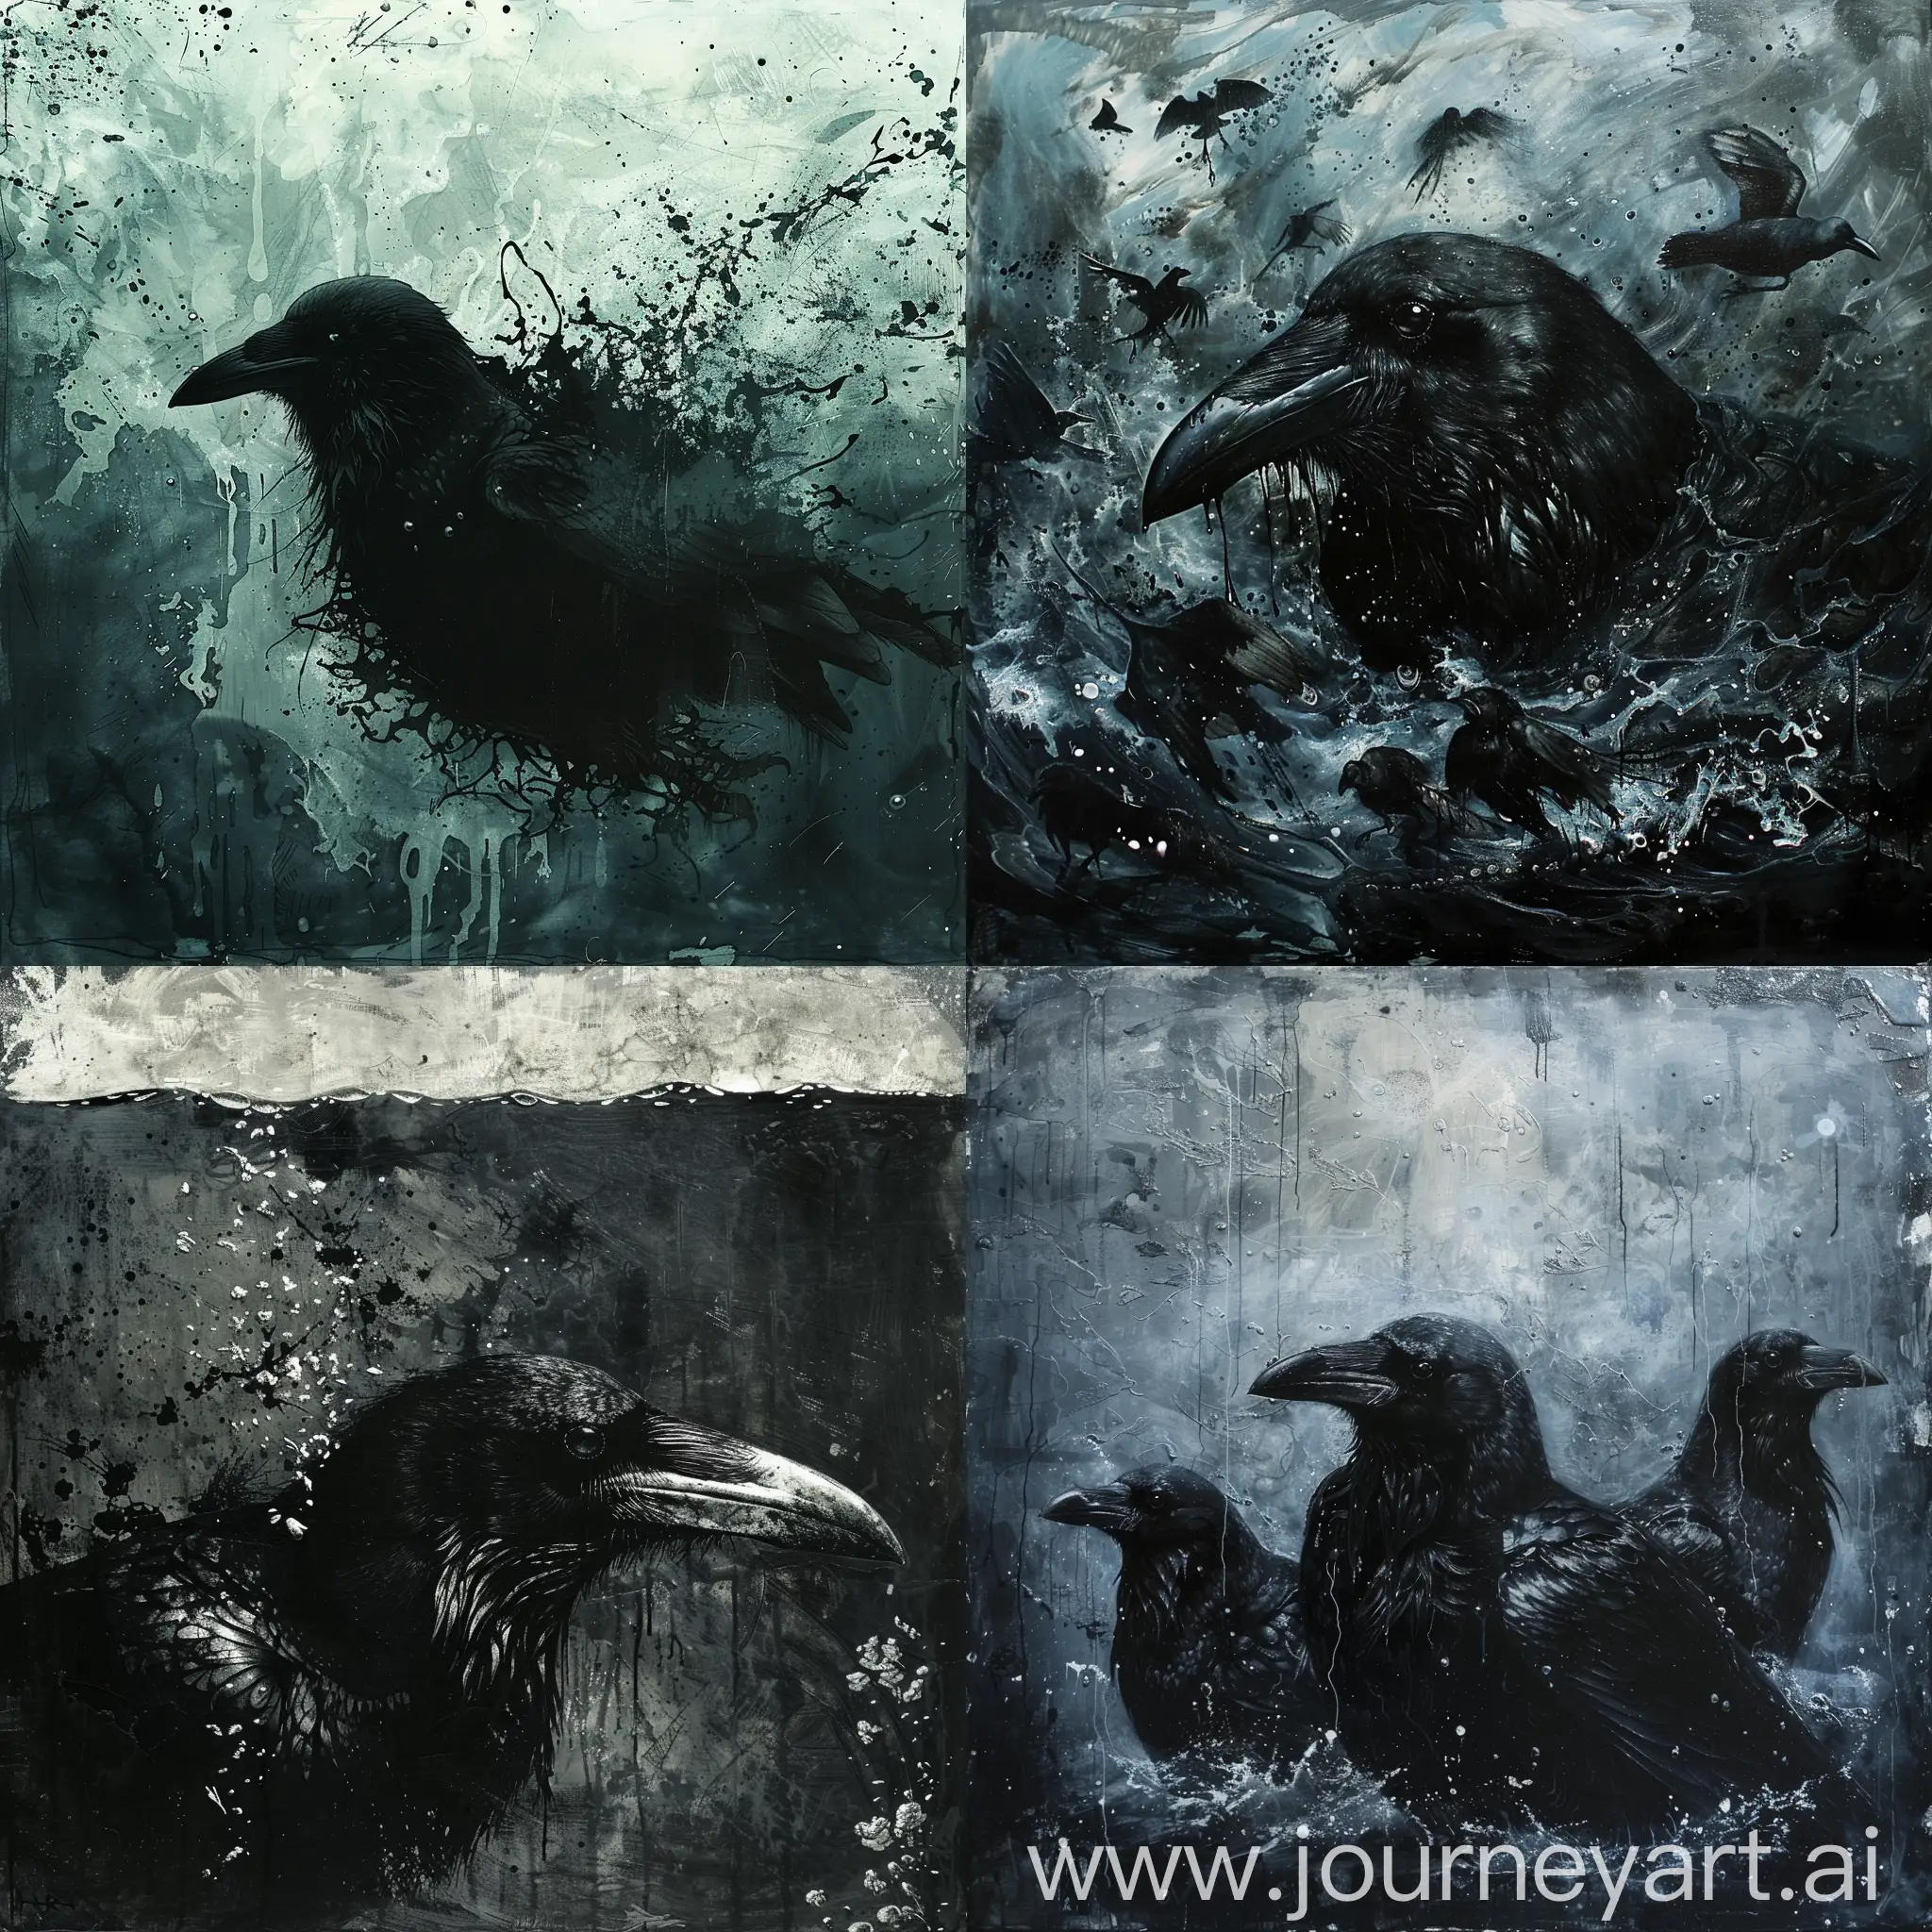 Apocalyptic-Underwater-Scene-with-Death-Crow-in-Black-Metal-Environment